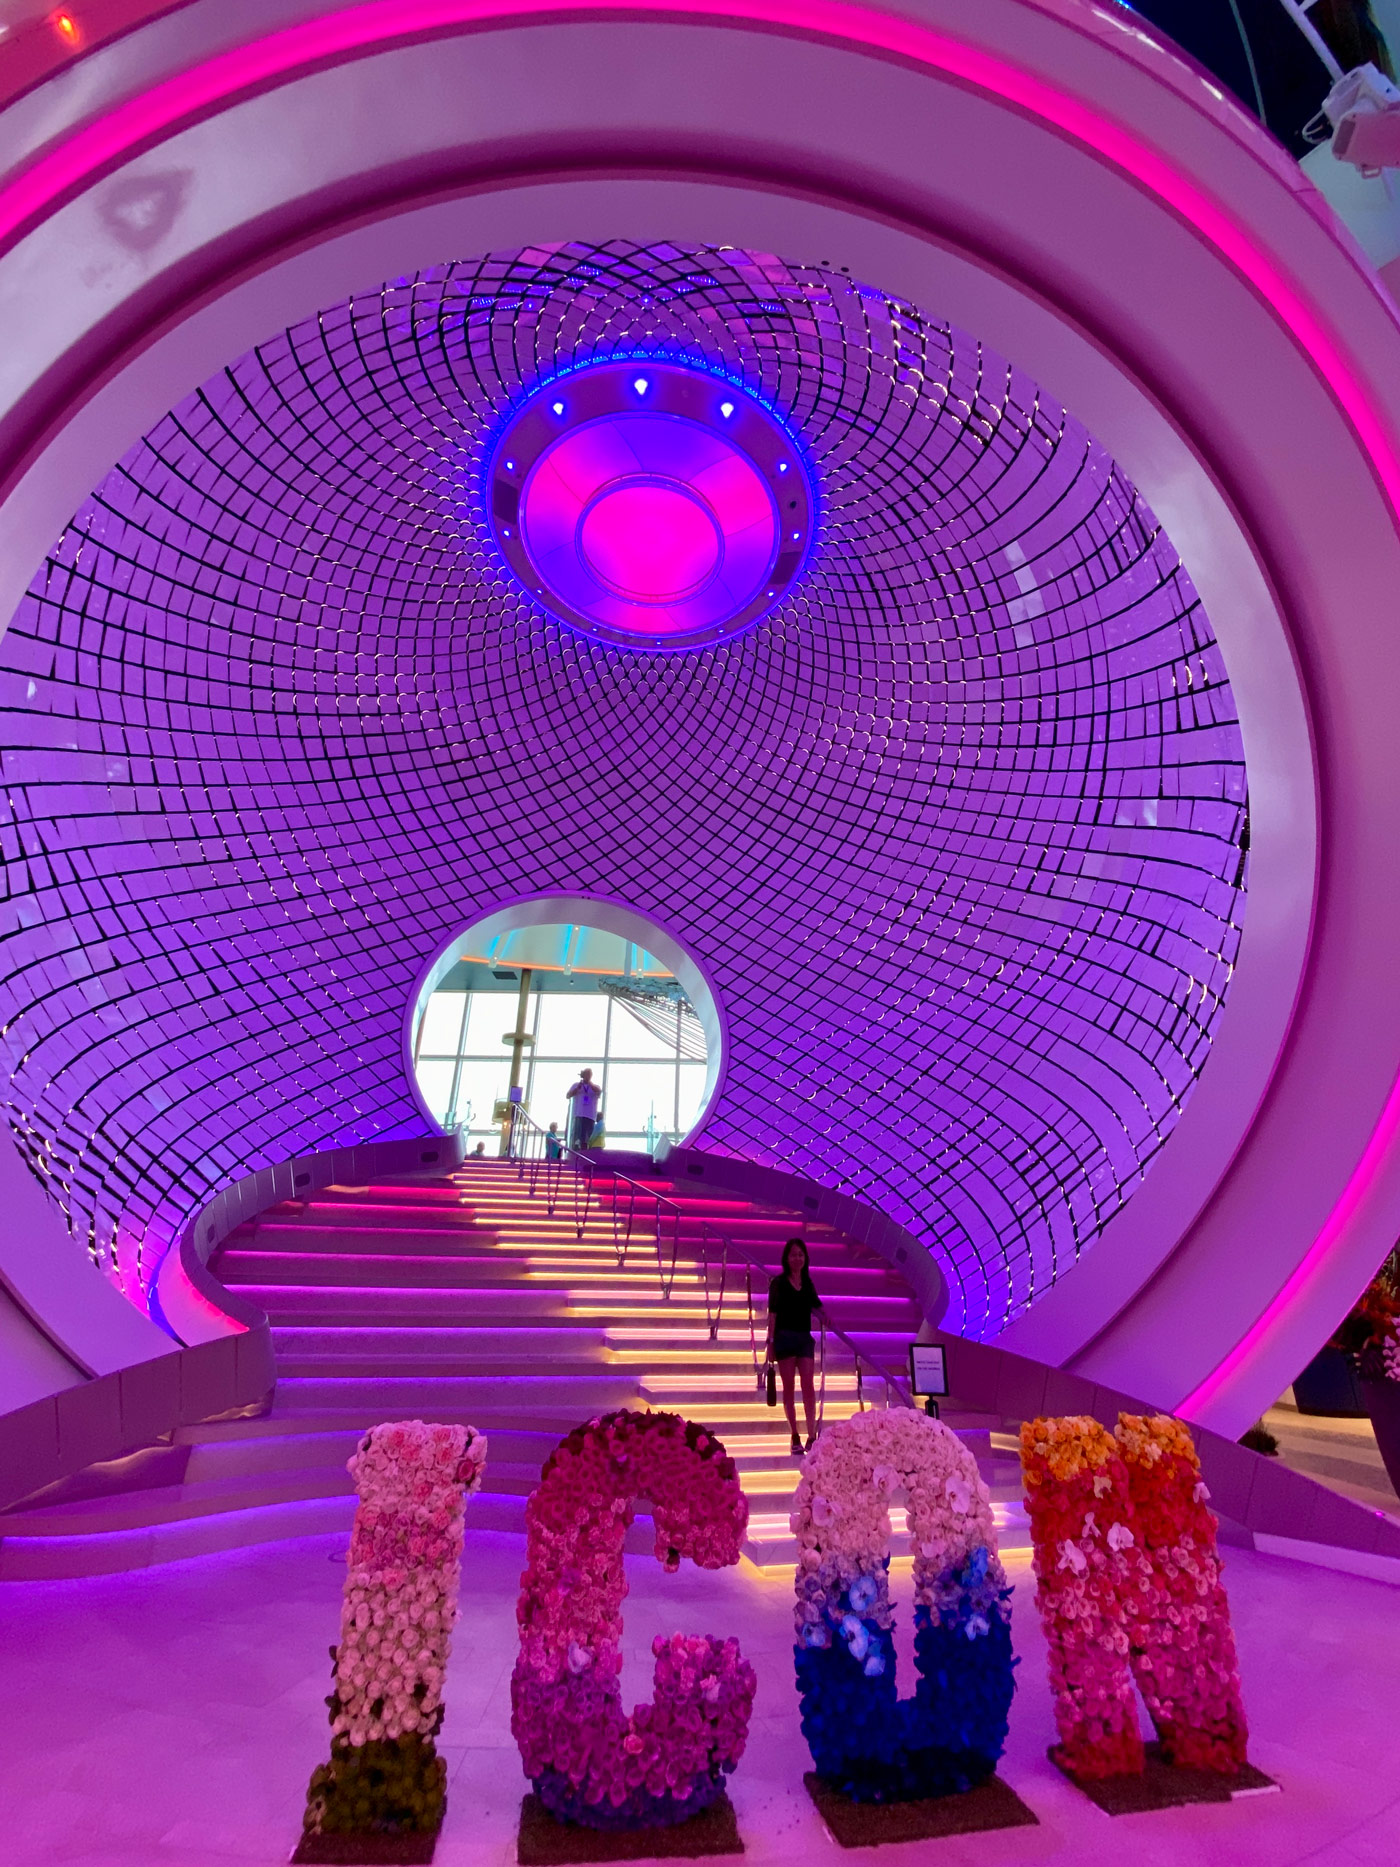 The Pearl, the world's largest kinetic art sculpture, is the focal point on the Royal Promenade